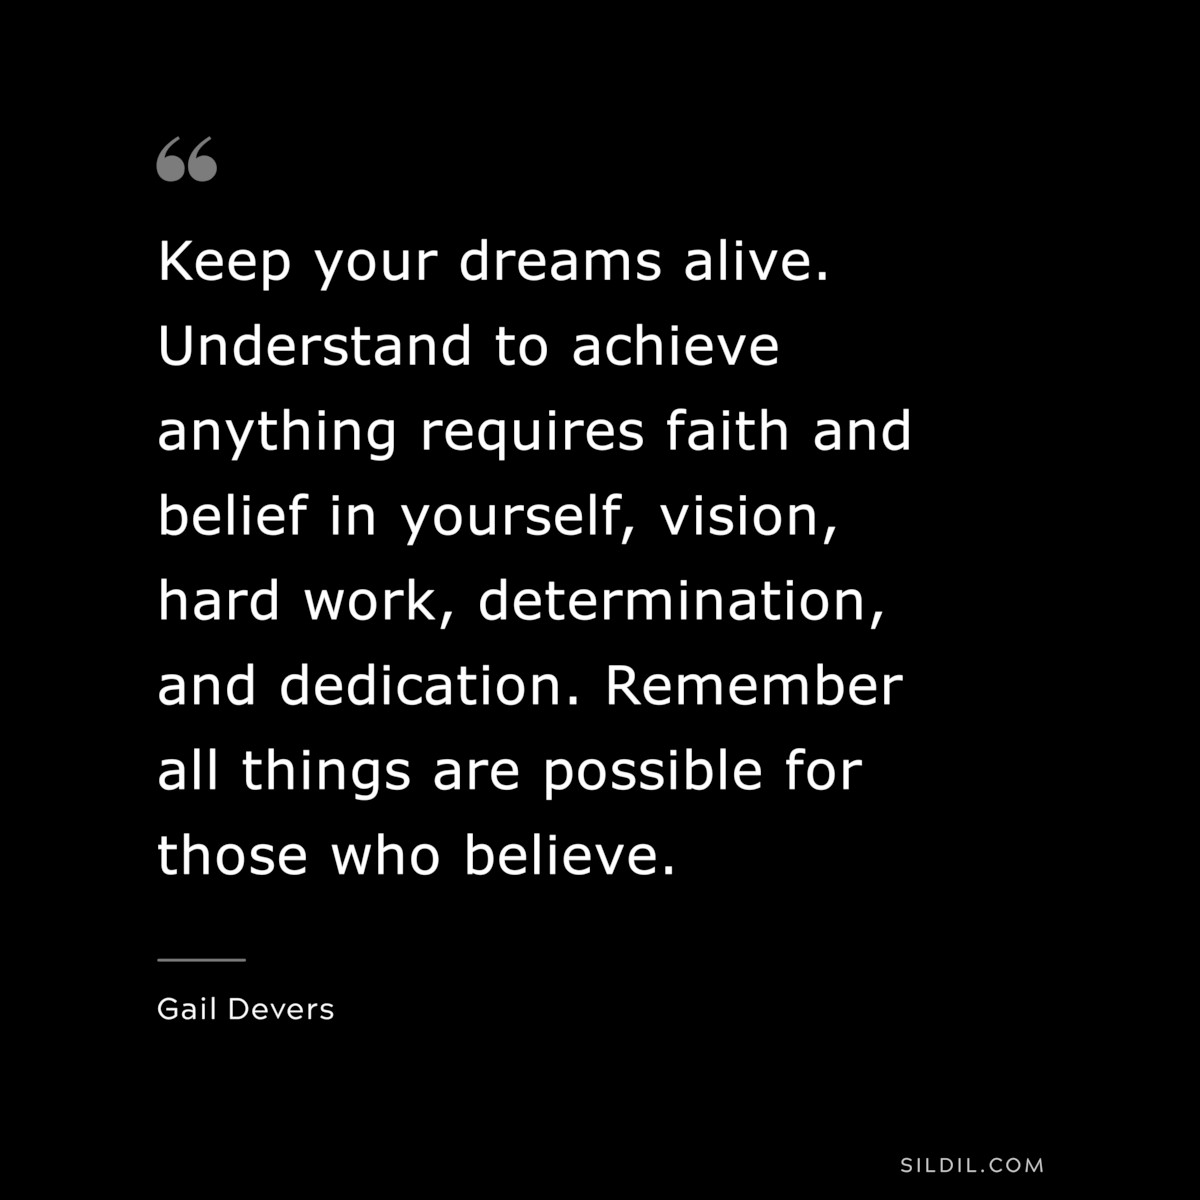 Keep your dreams alive. Understand to achieve anything requires faith and belief in yourself, vision, hard work, determination, and dedication. Remember all things are possible for those who believe. ― Gail Devers